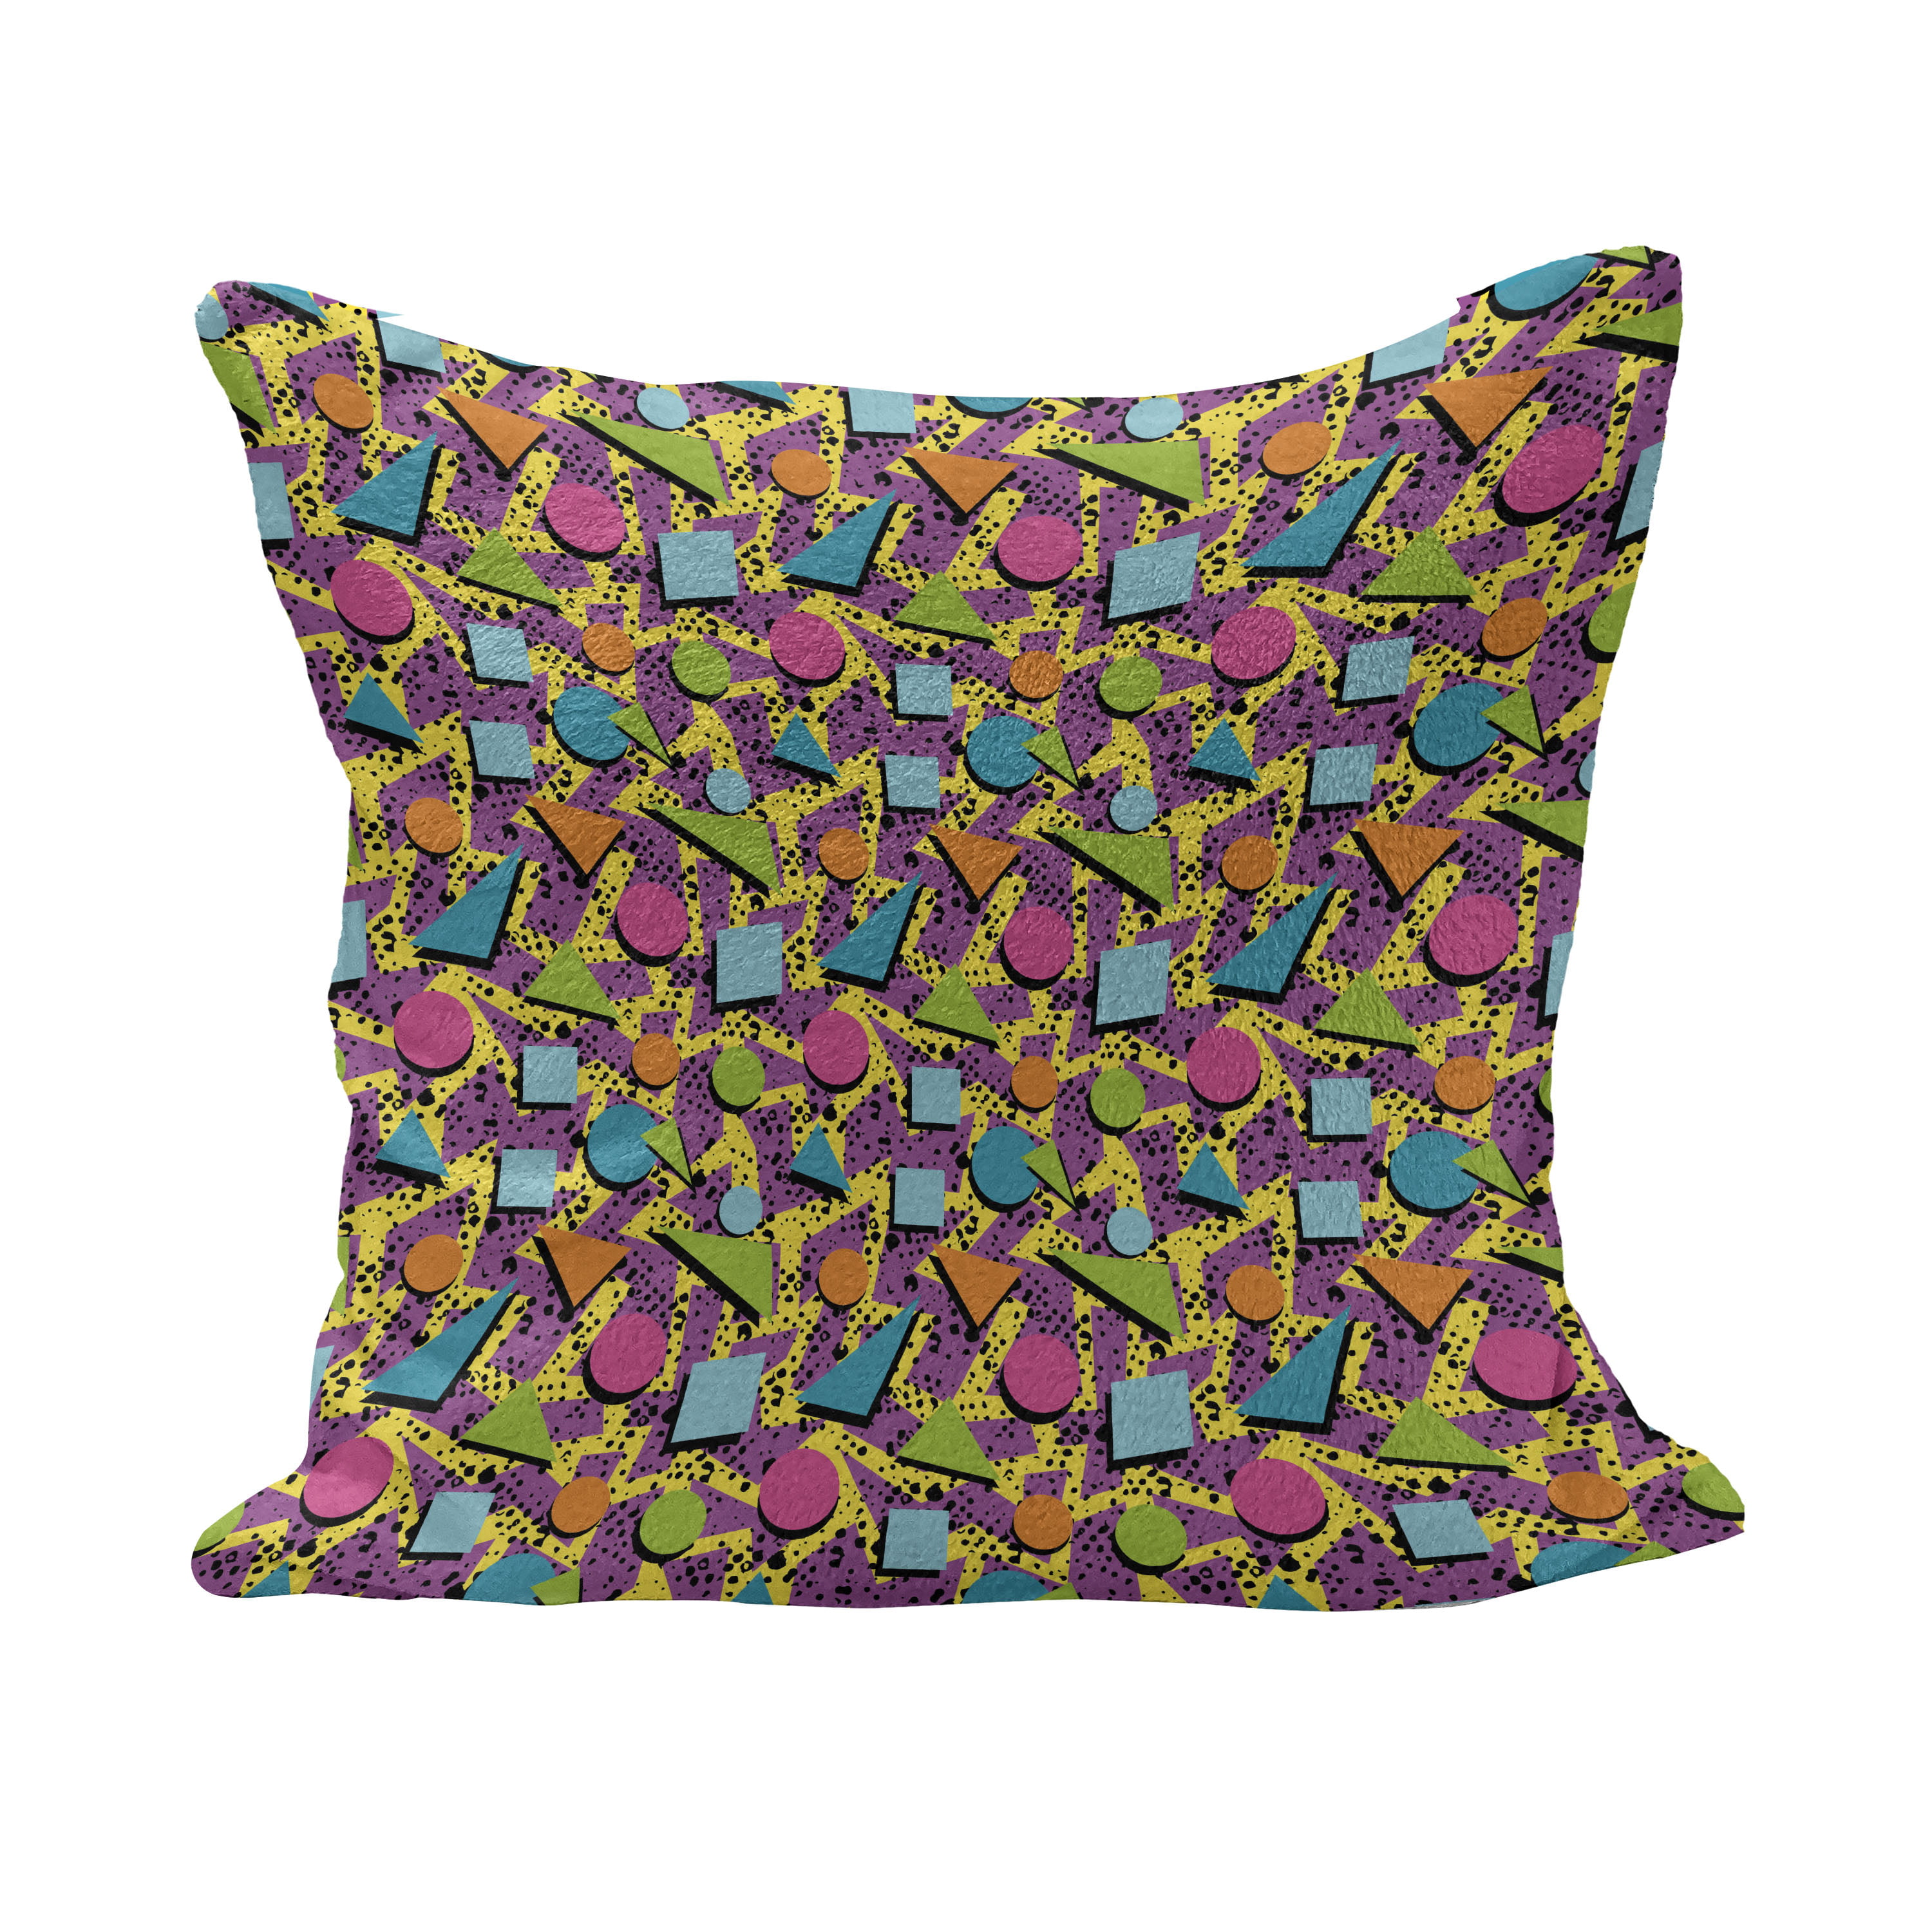 Multicolor 16x16 Vintage Retro Accessories 80s Style Abstract Deco Pop Art Colorful Dots Pattern Throw Pillow